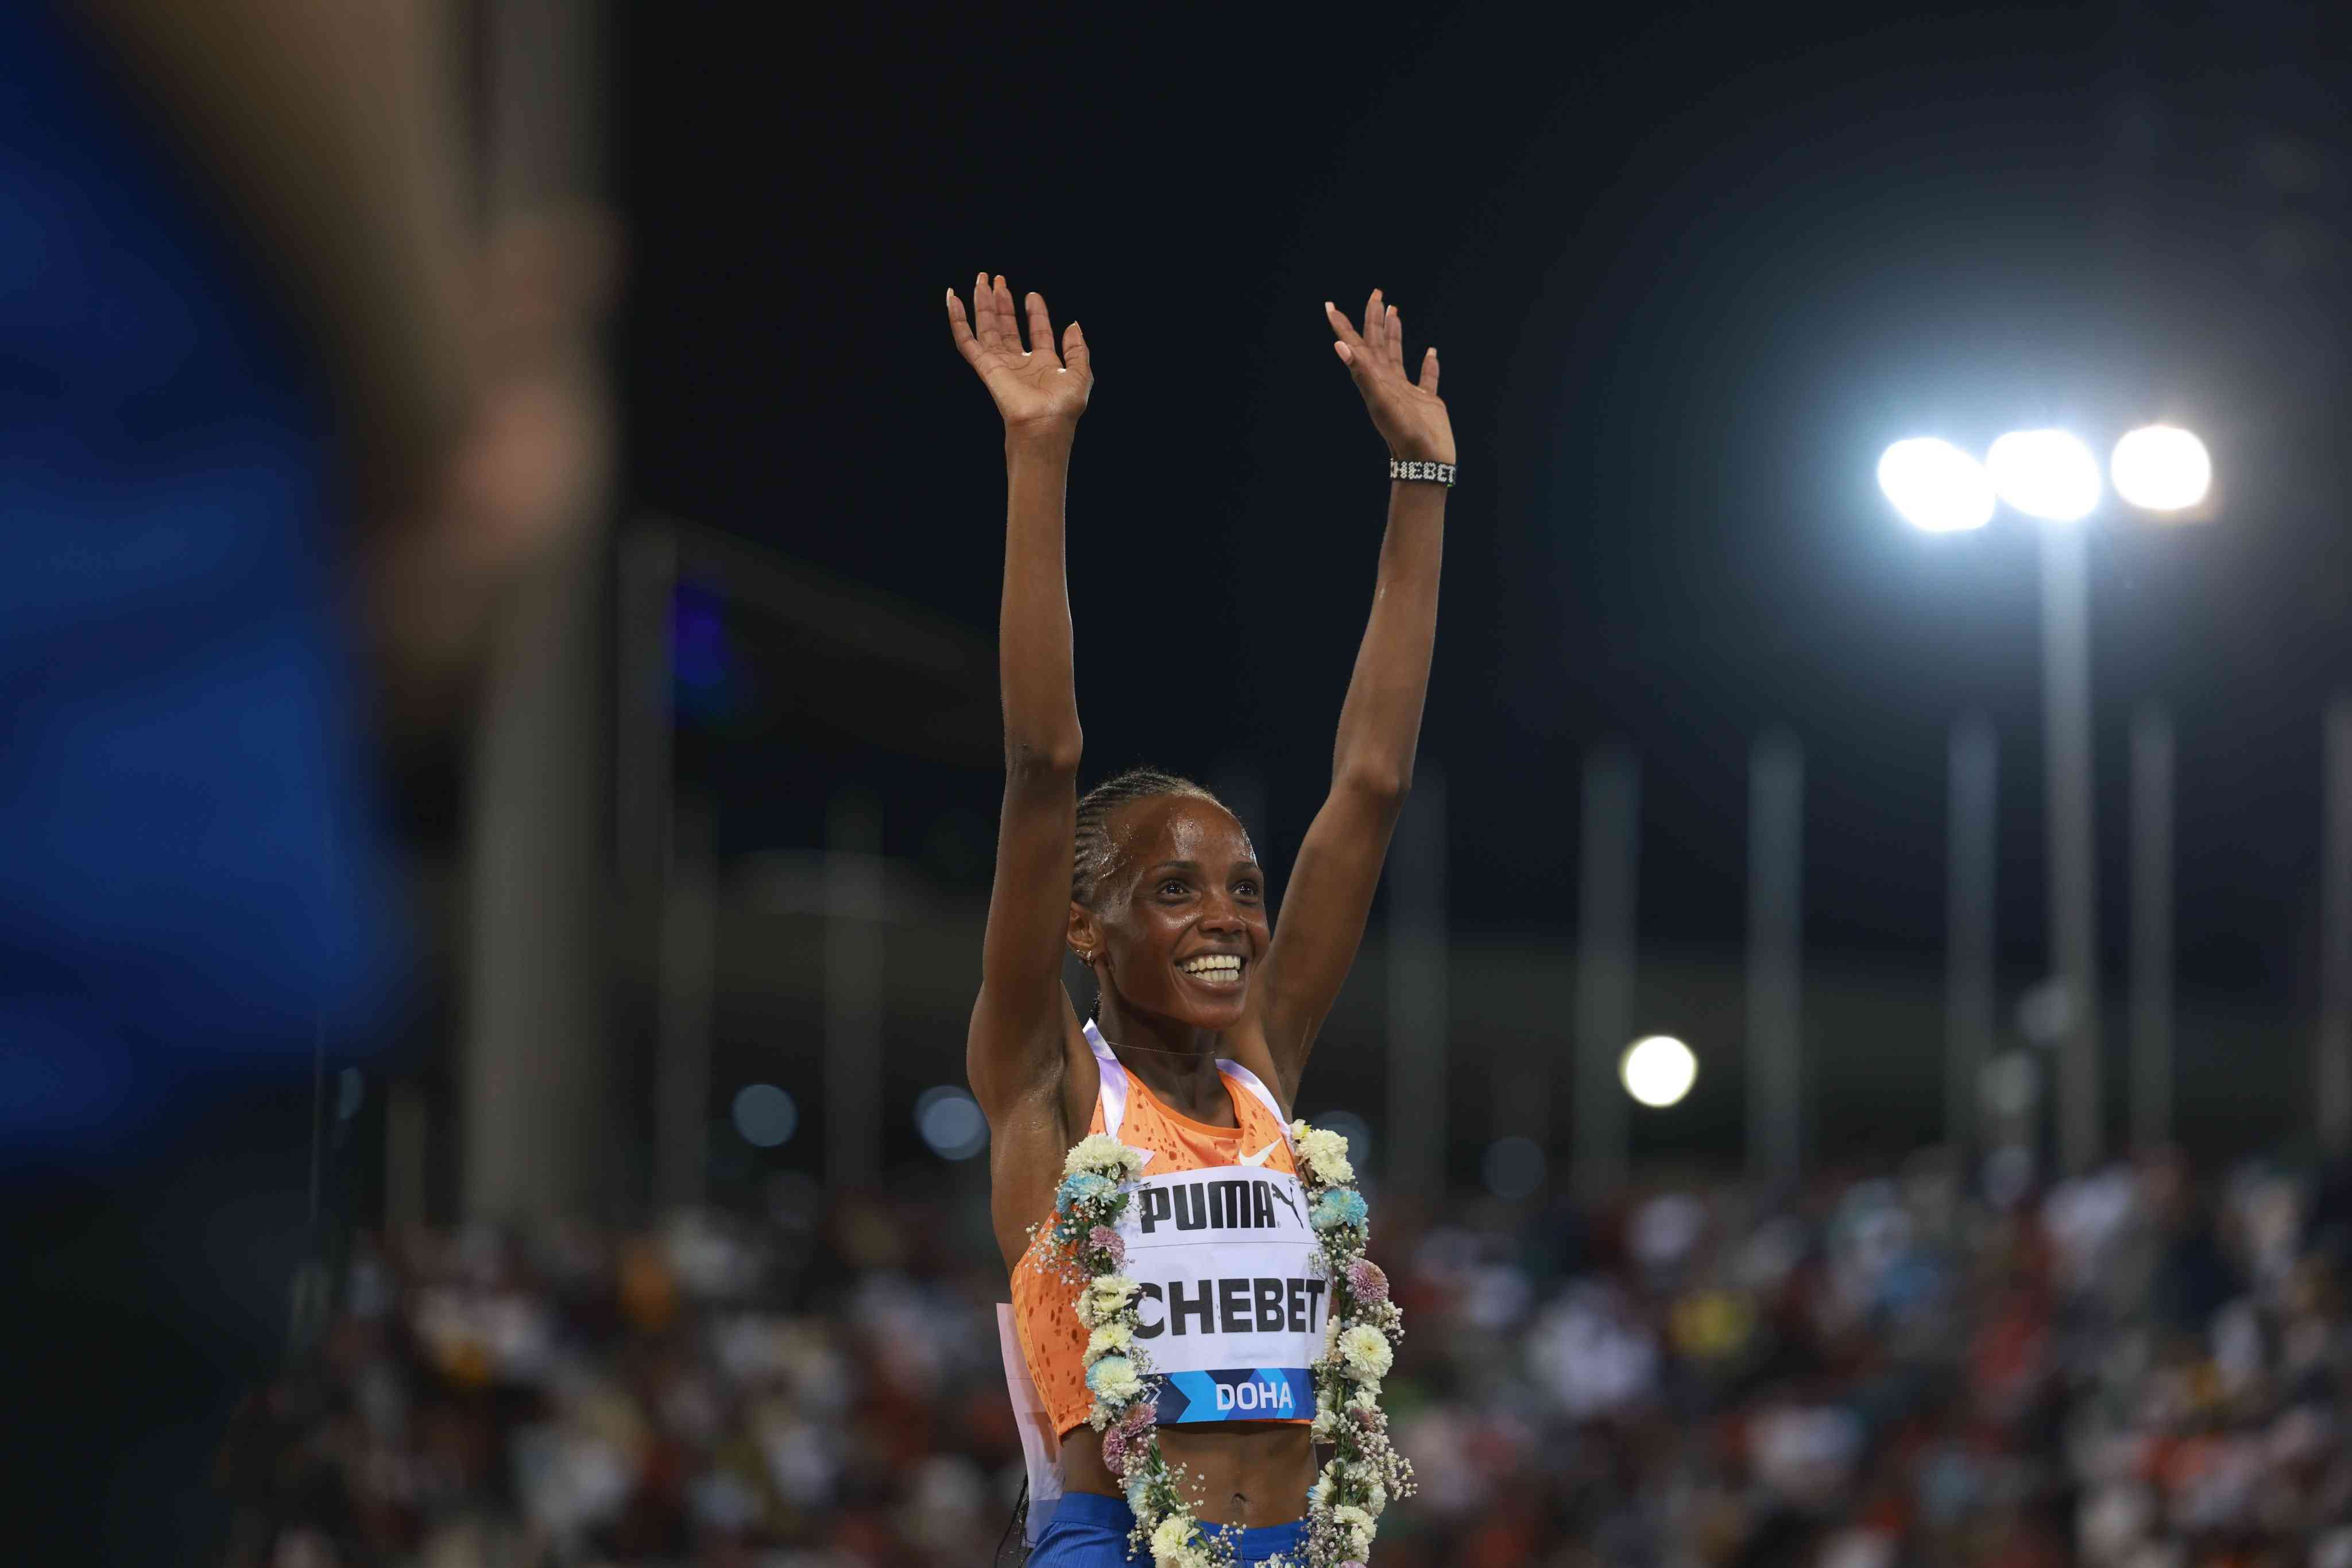 Chebet maintains dominance in women's 5000m at Doha Diamond League